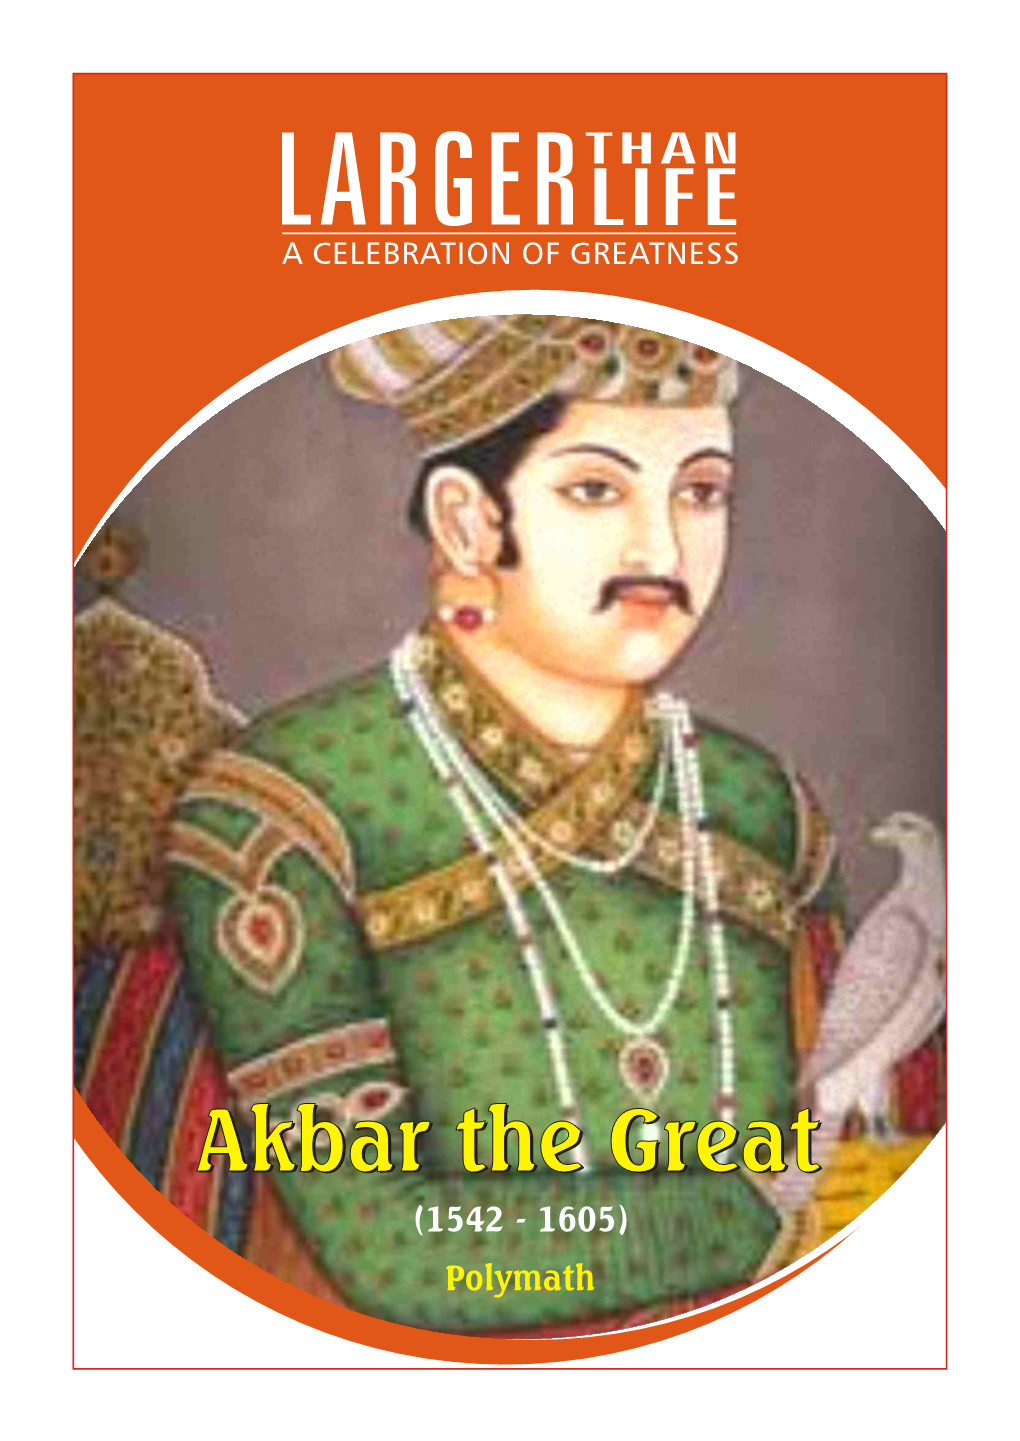 Akbar the Great Was the Son of Nasiruddin Humayun Whom He Succeeded As Ruler of the Mughal Empire from 1556 to 1605